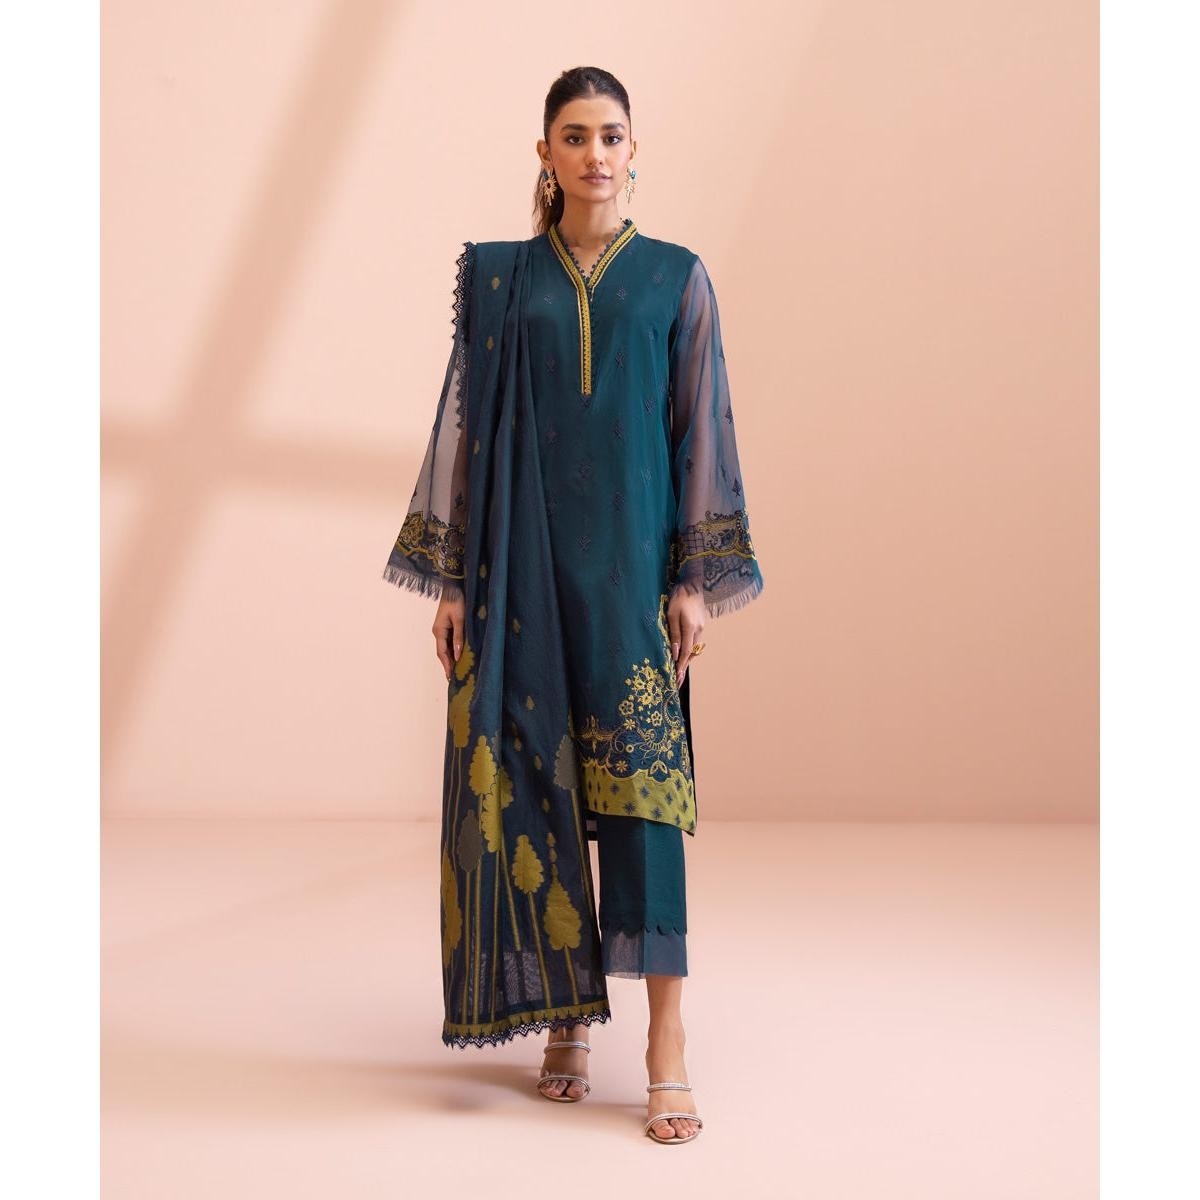 /2023/10/sapphire-unstitched-lawn-vol-1-3-piece-dyed-embroidered-blended-organza-suit-411210132_pk-1964837337-image1.jpeg